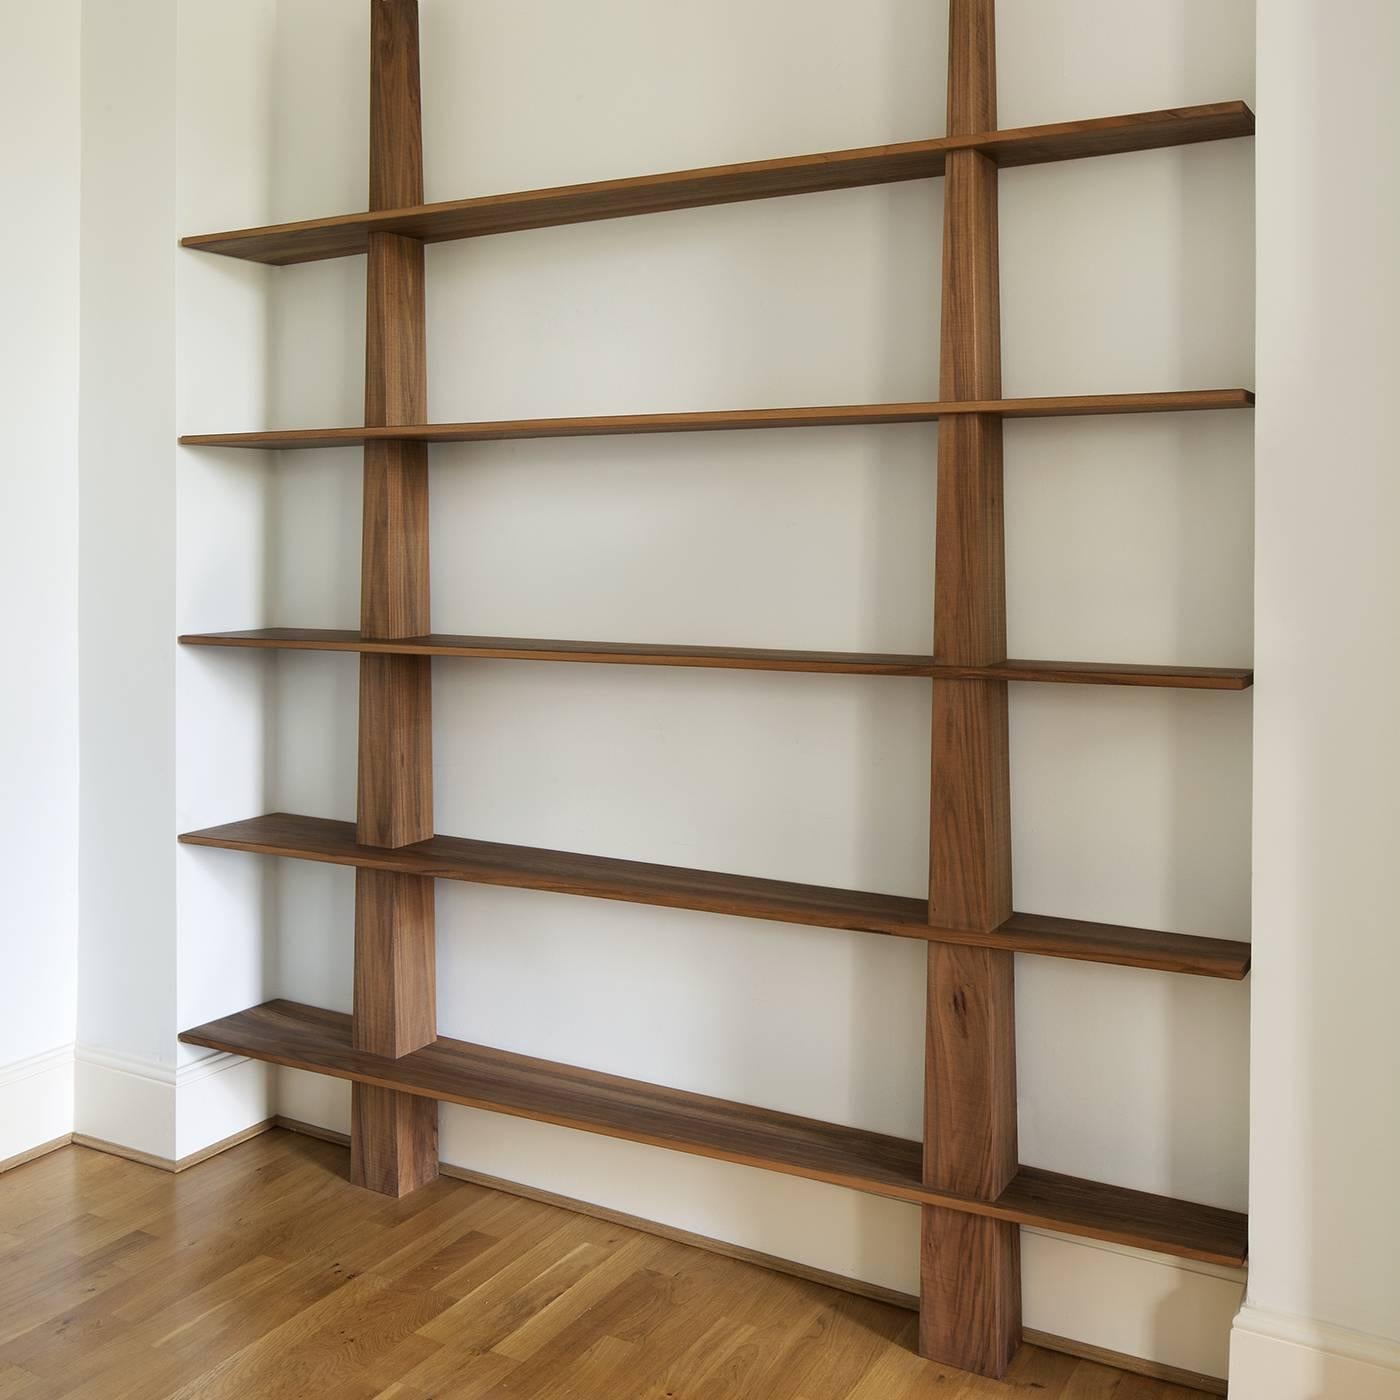 Stunning in its simplicity, this bookcase is an elegant arrangement of intersecting wooden planes. Designed by Mauro Dell'Orco, the bookcase is composed of two vertical elements that support five rows of trapezoidal shelves. The two vertical planes